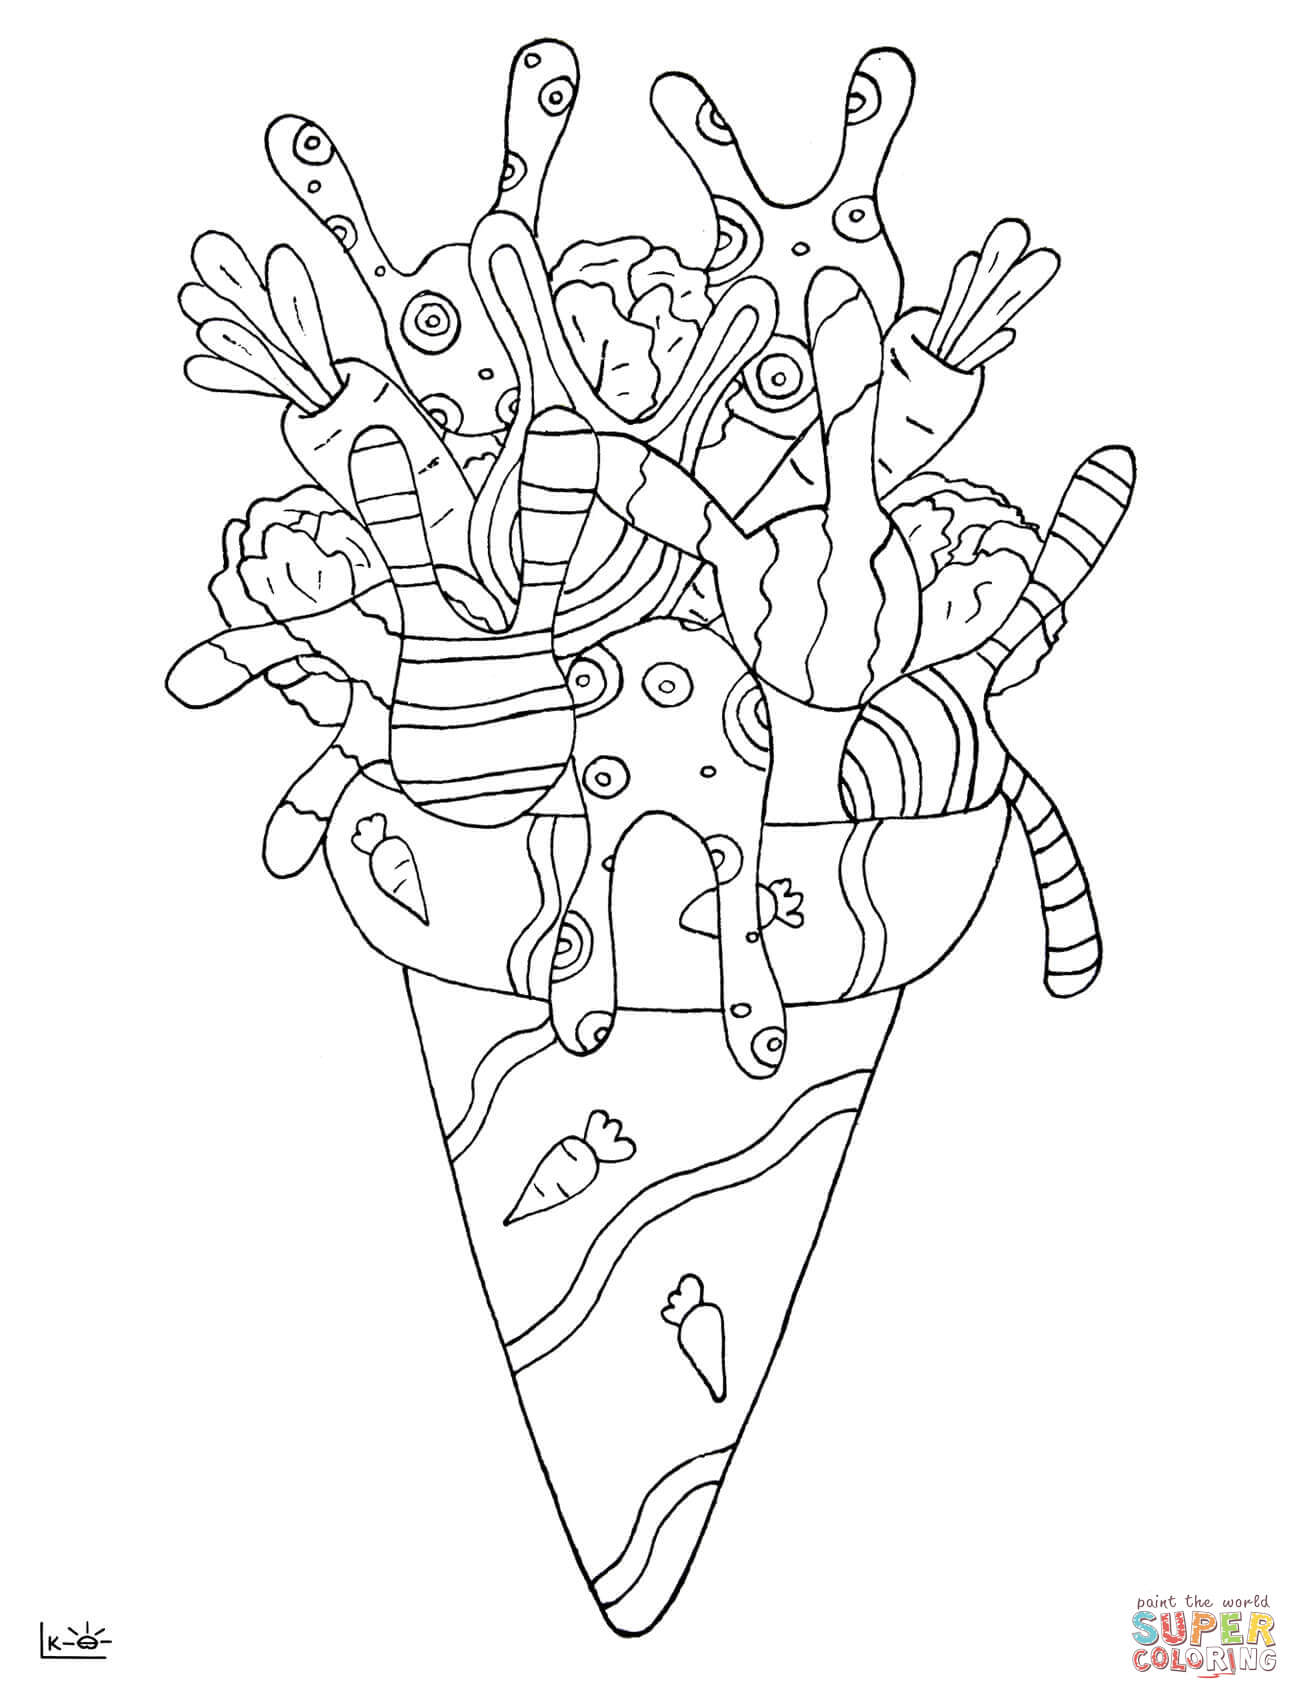 Download Rabbit Ice Cream Coloring Books - ColoringPagesOnly.com